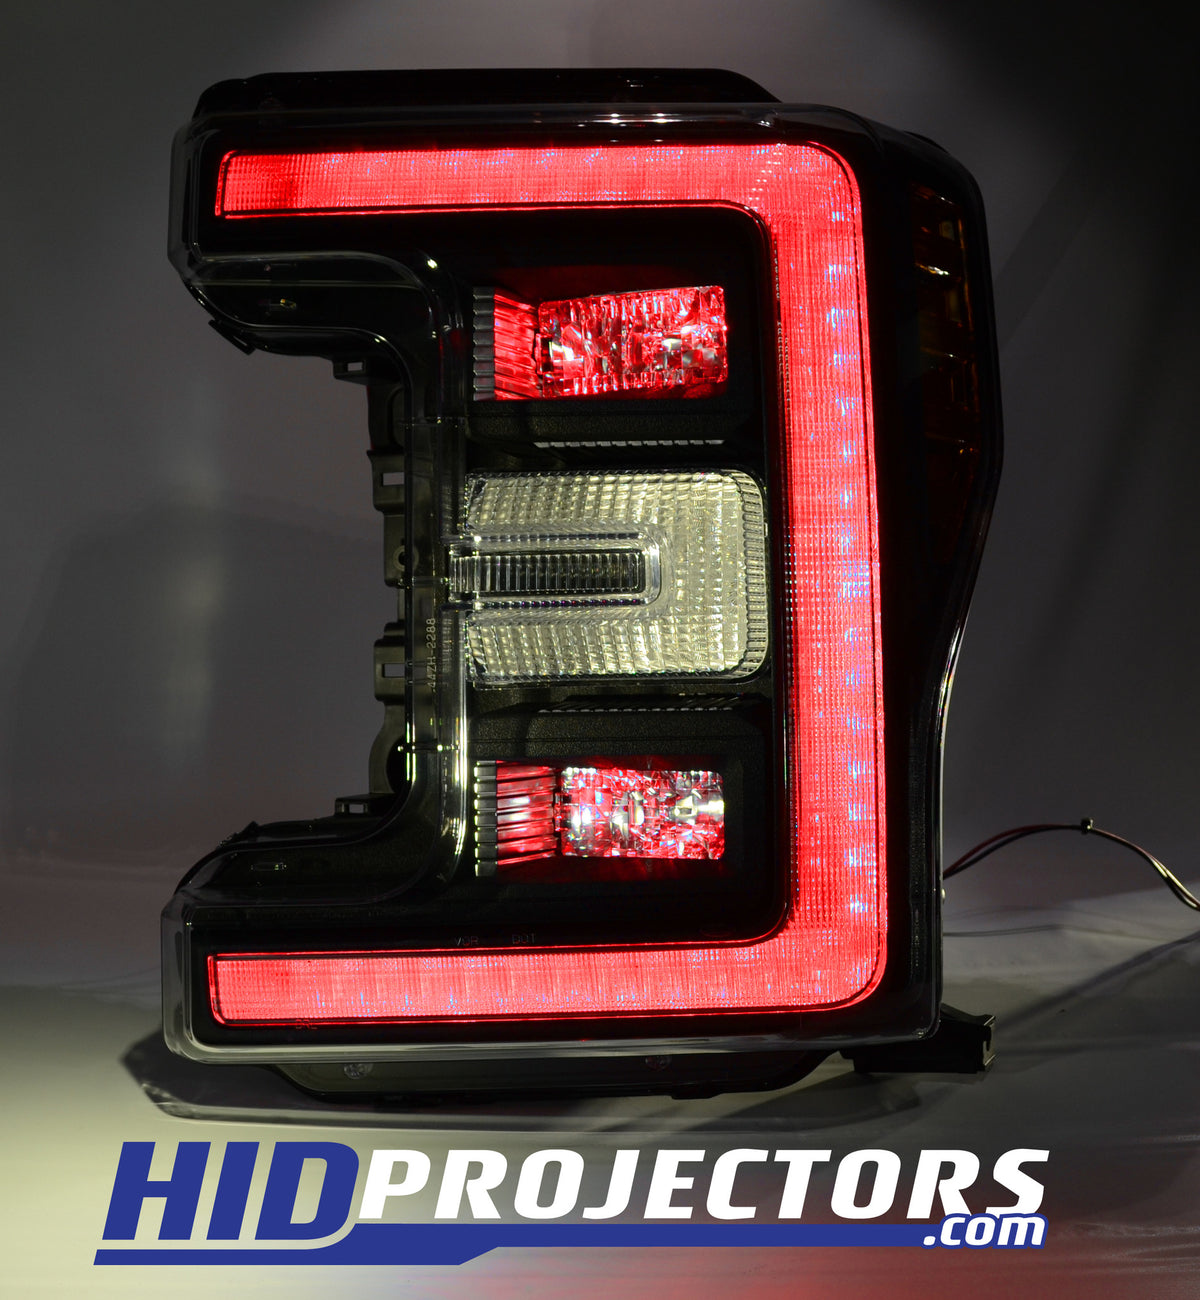 2017+ Ford Super Duty LED Headlight Customization Service (Mail In Your Lights)